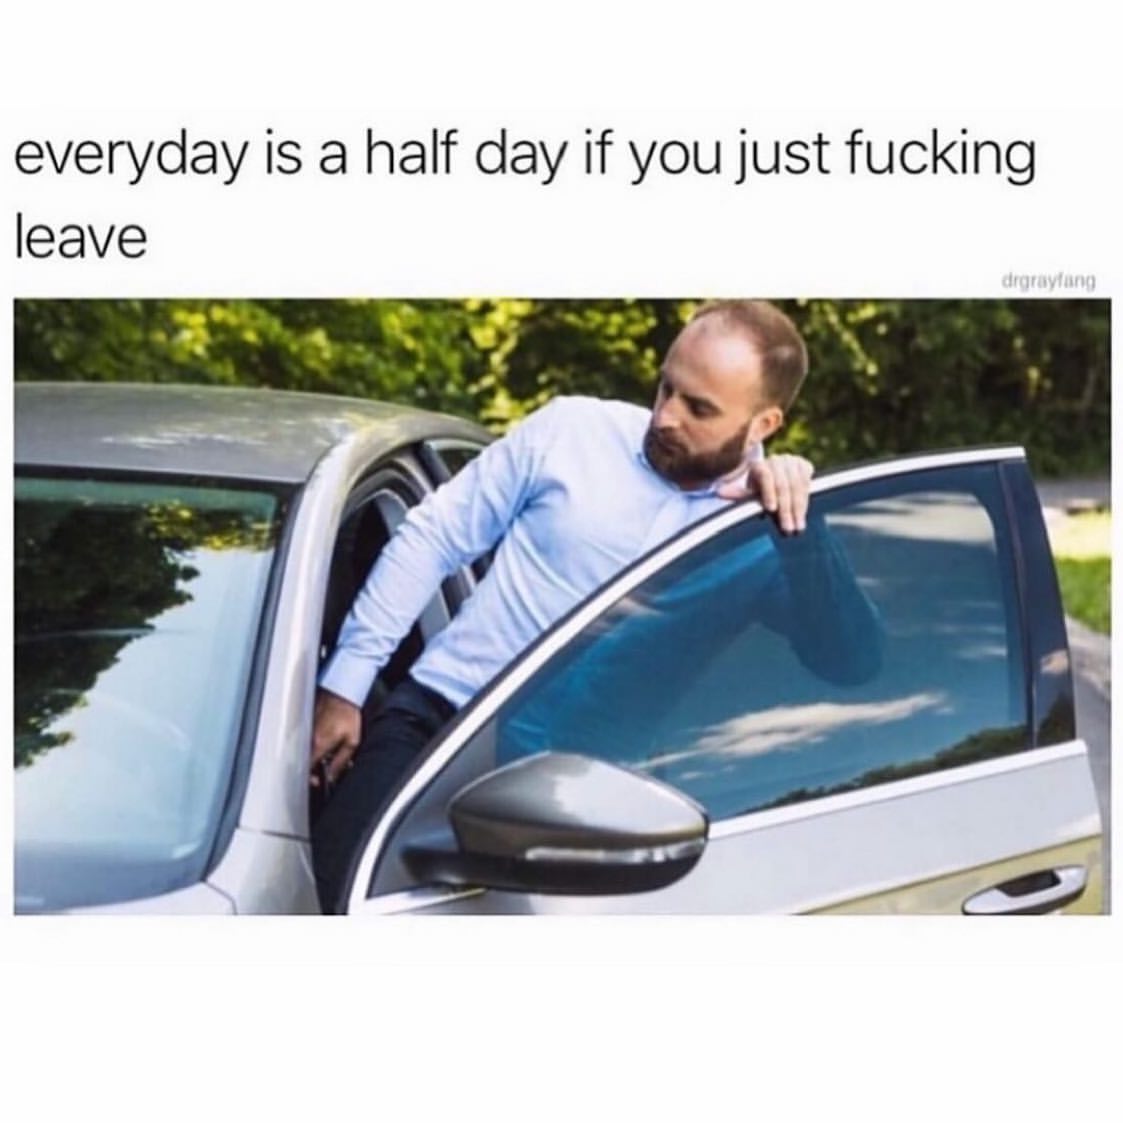 Everyday is a half day if you just fucking leave.